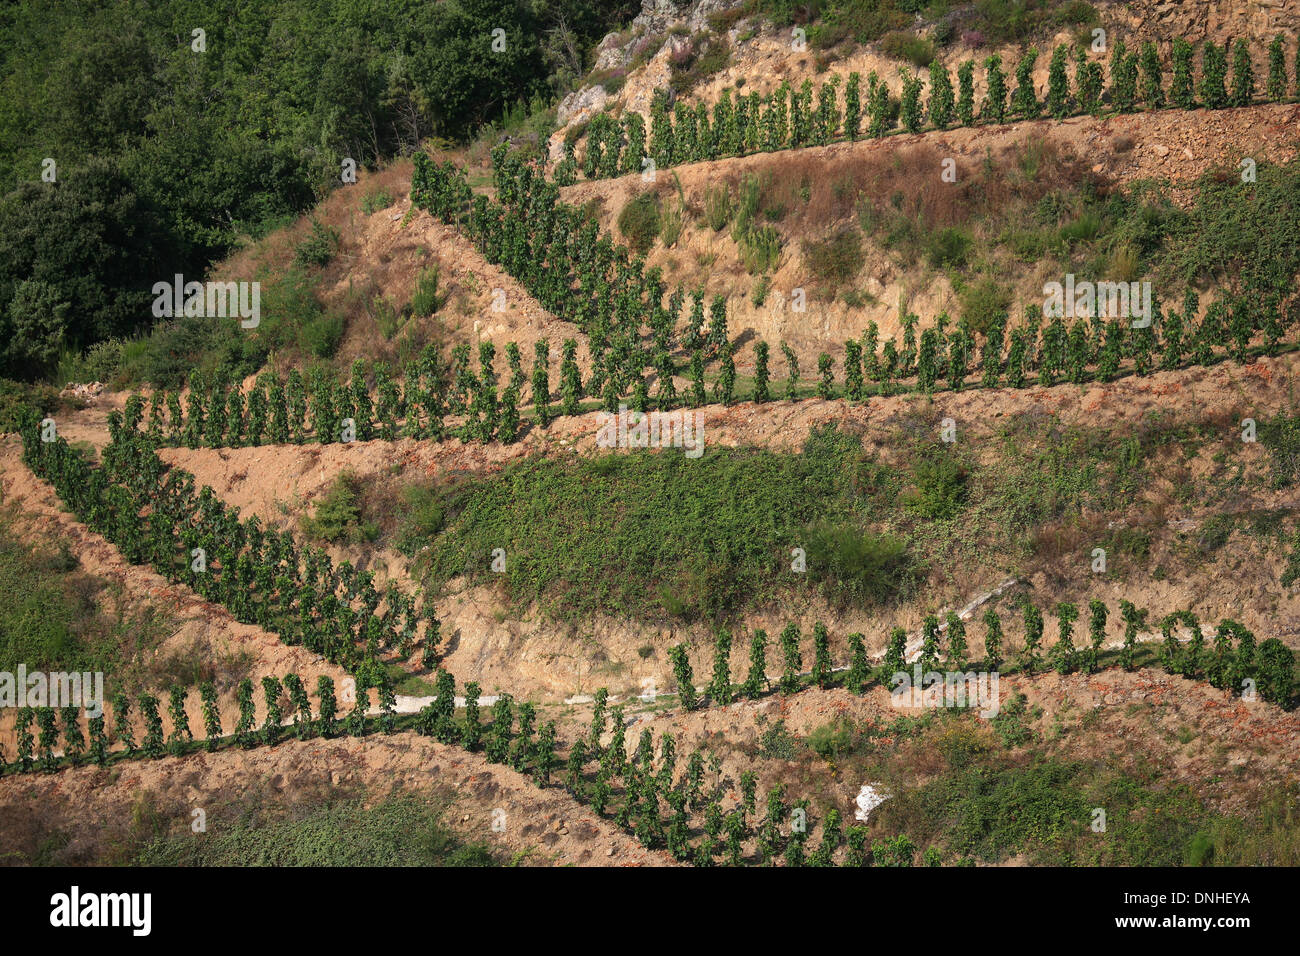 GRAPEVINES AND VINEYARDS ON THE HILLSIDES OF CHATEAUBOURG, (07) ARDECHE, RHONE-ALPES, FRANCE Stock Photo